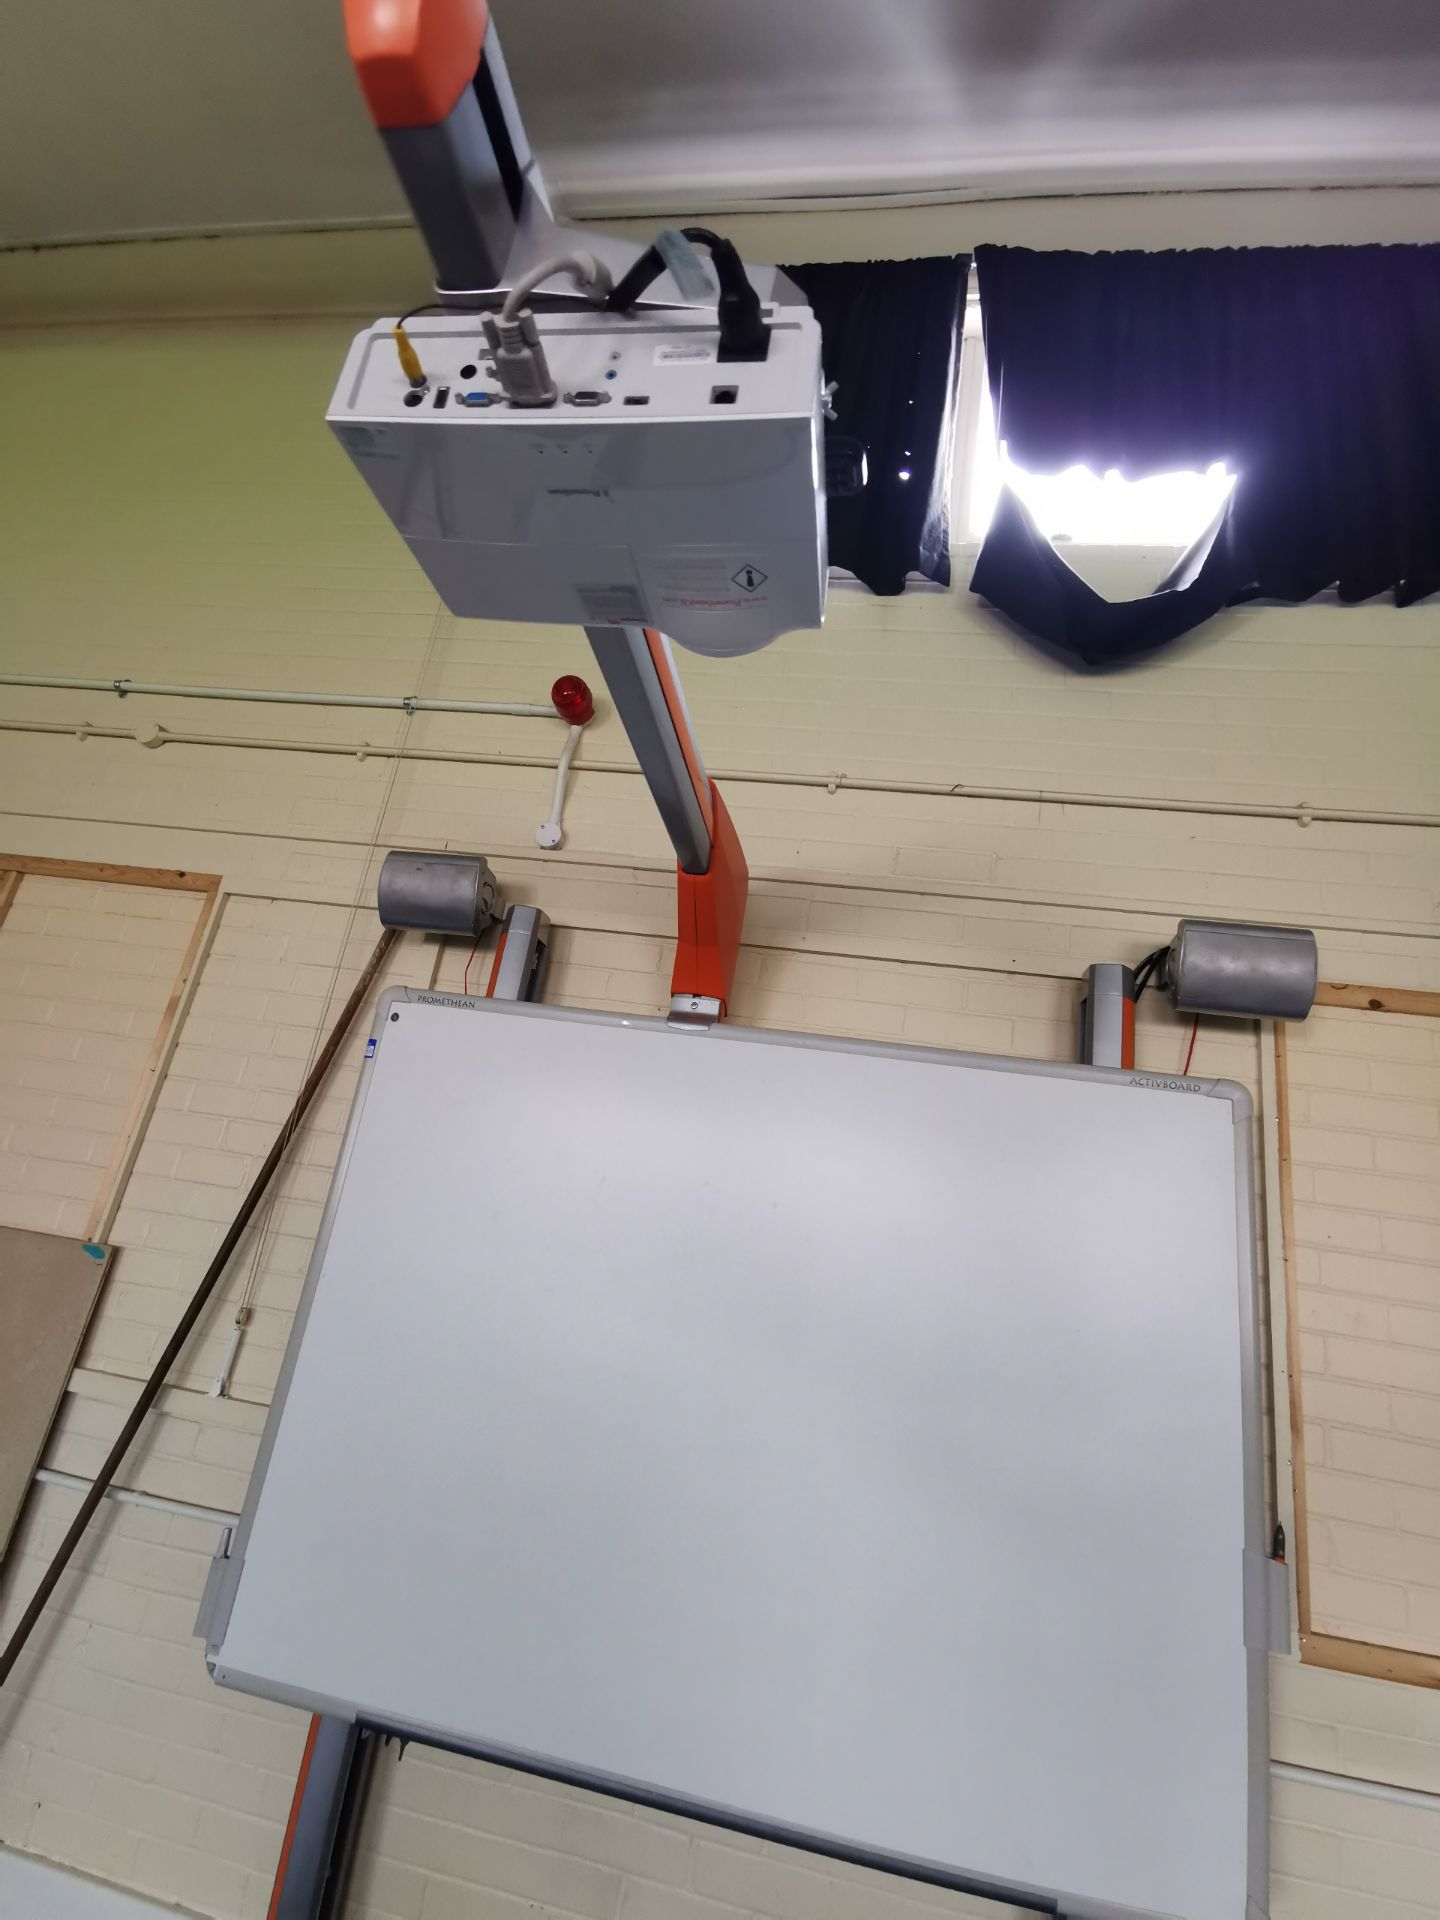 Promethean active board, projector and speakers [on stand]